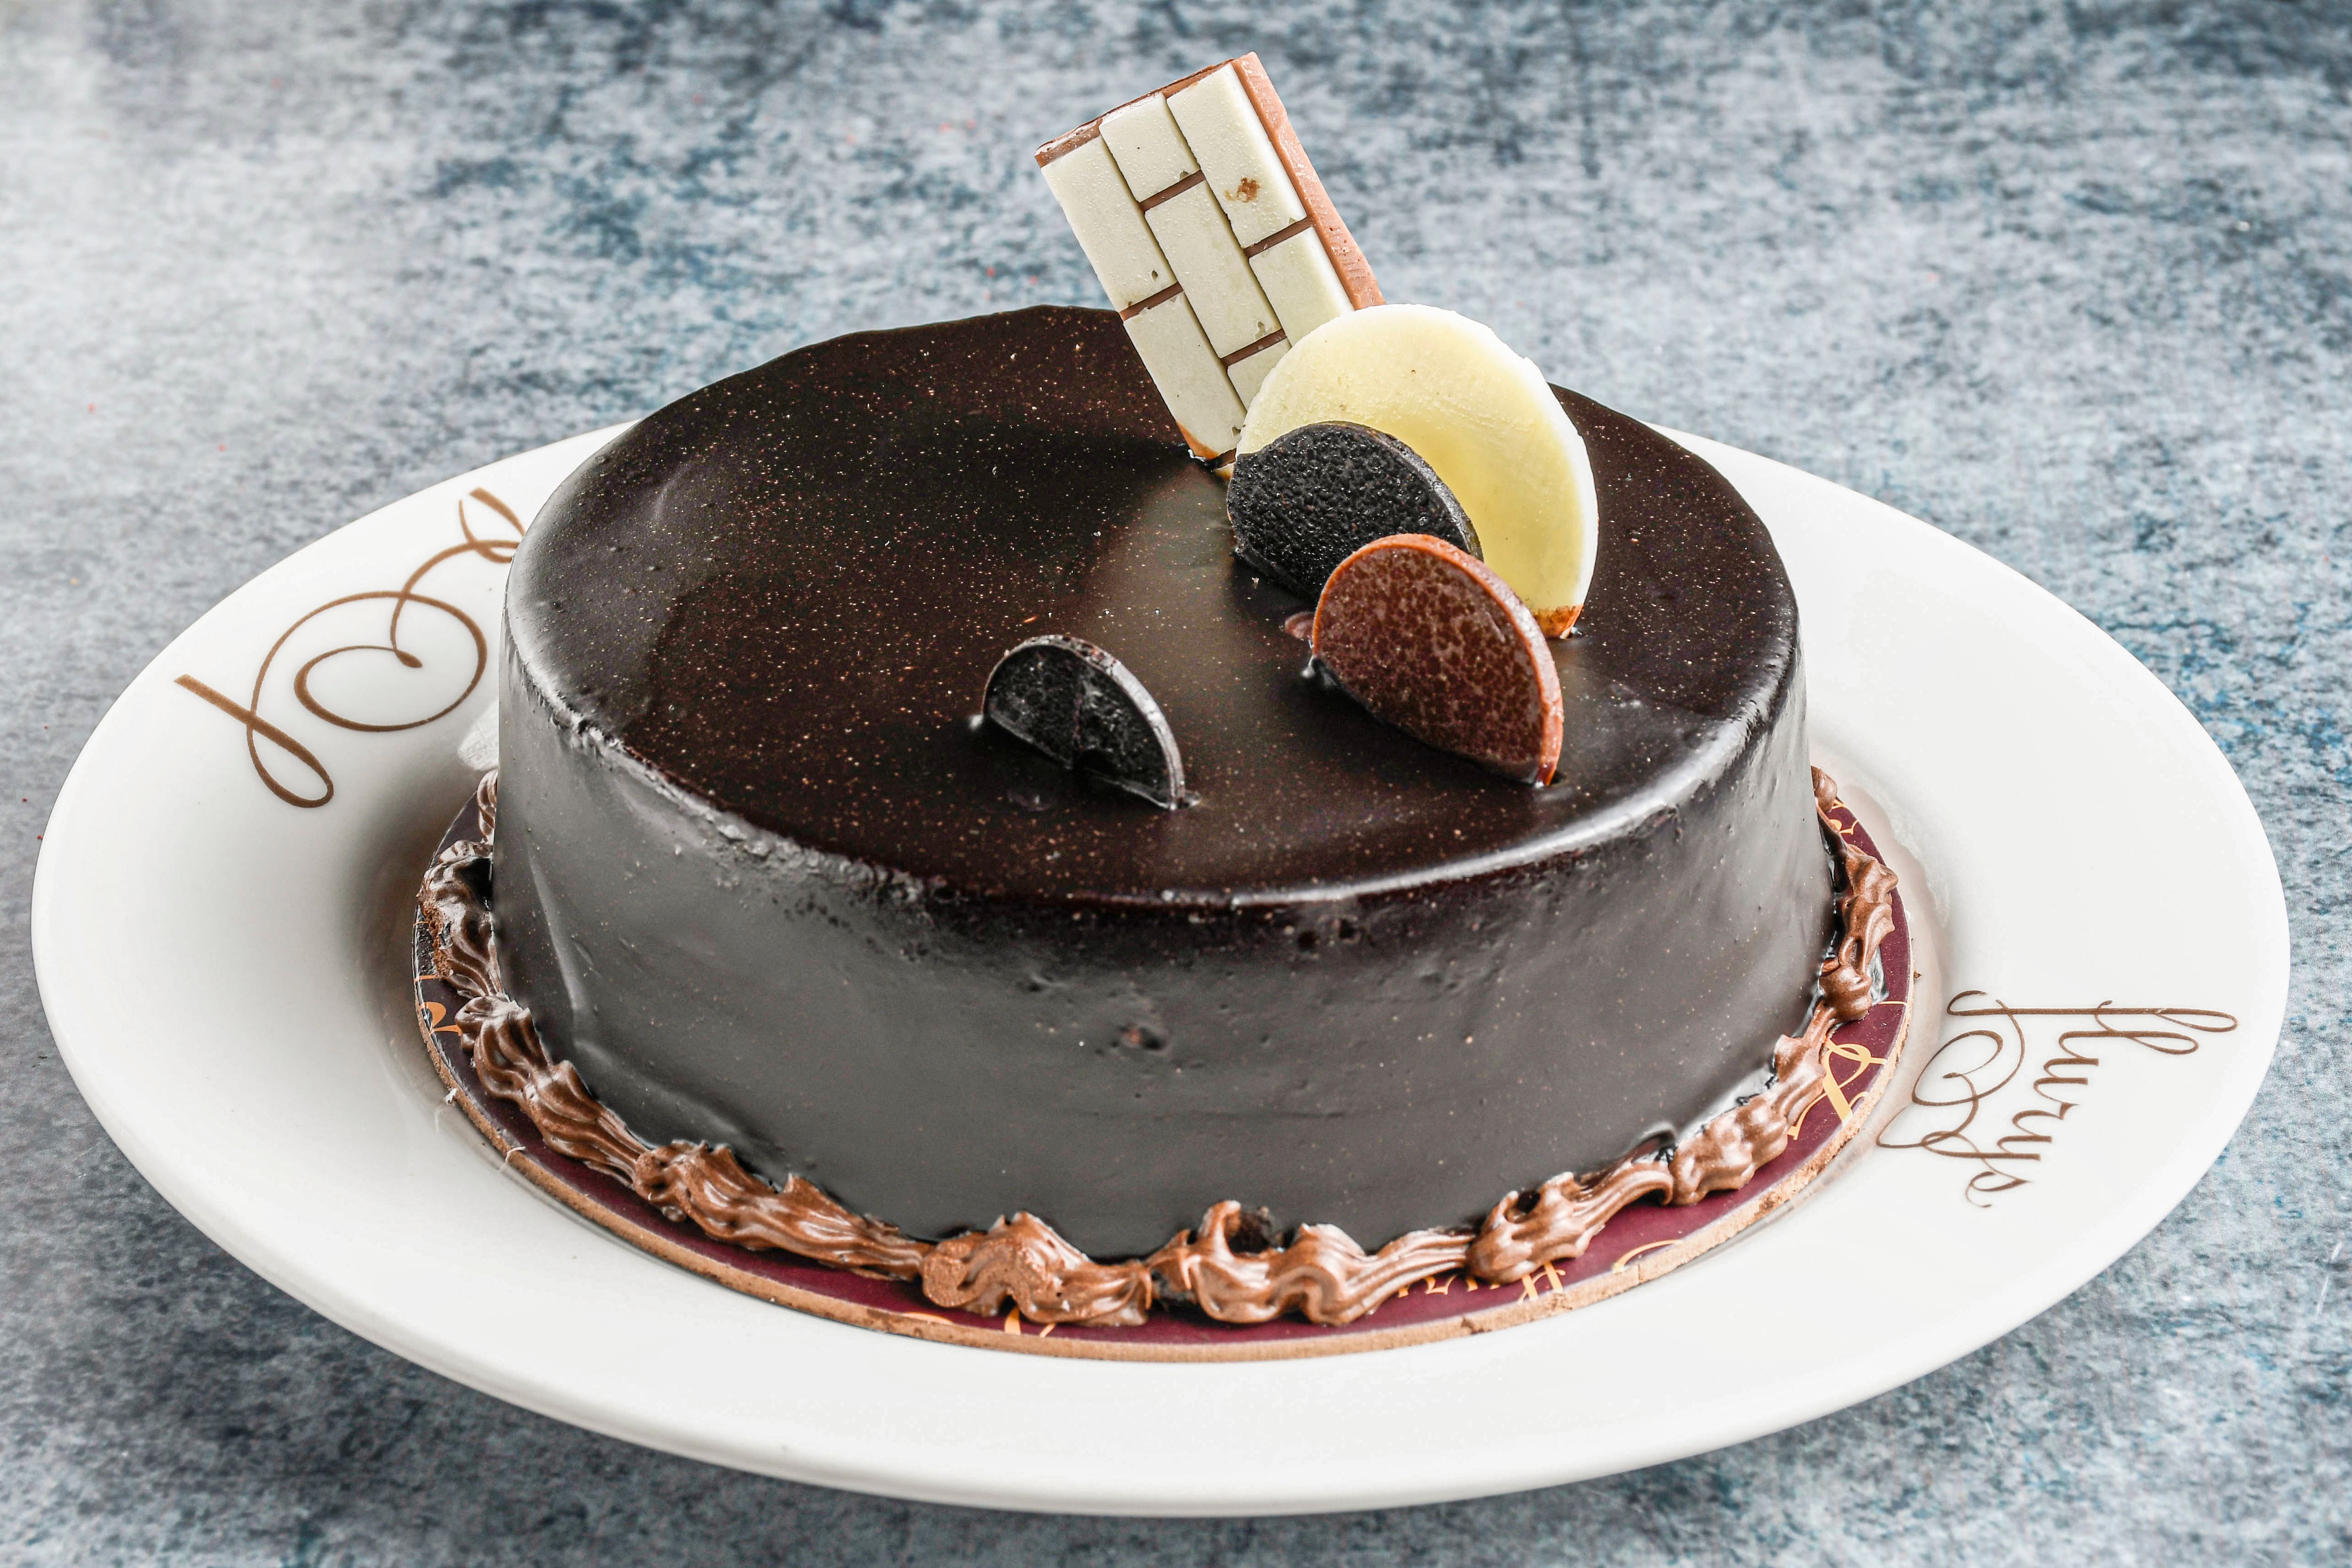 Best Cake Shops In Kolkata To Satiate Your Sweet Tooth